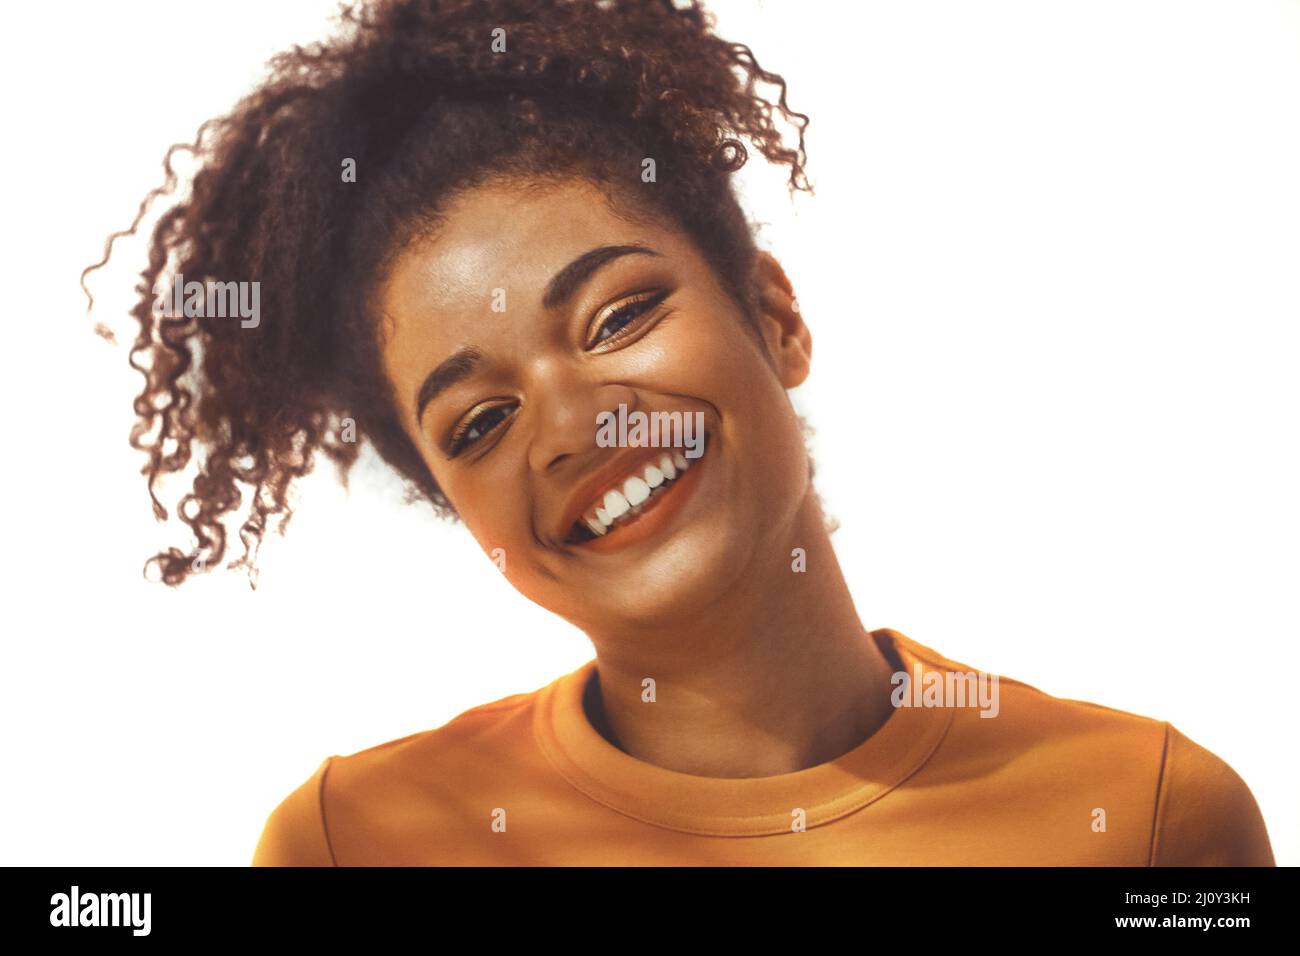 Close up portrait of happy black african young woman with curly lush hair tied up in high ponytail Stock Photo